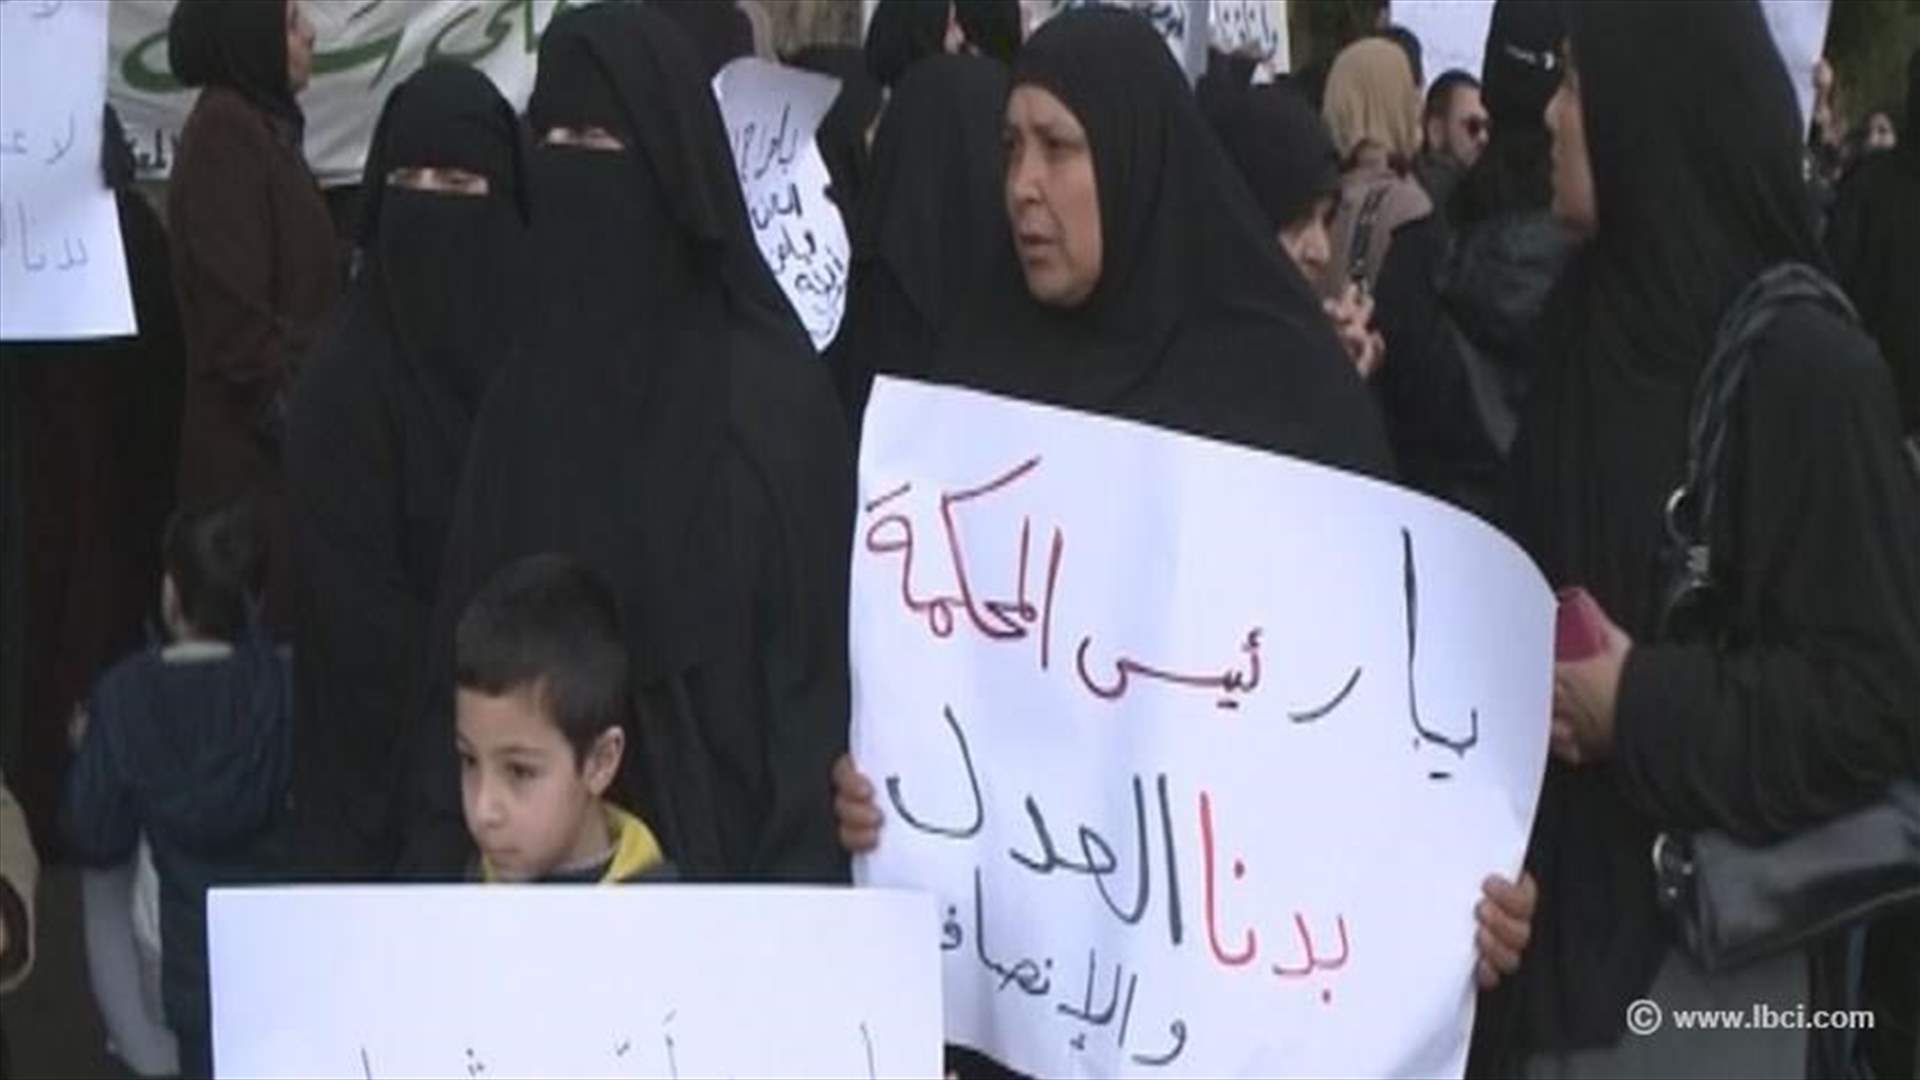 Families of Islamist detainees stage protest outside Military Court